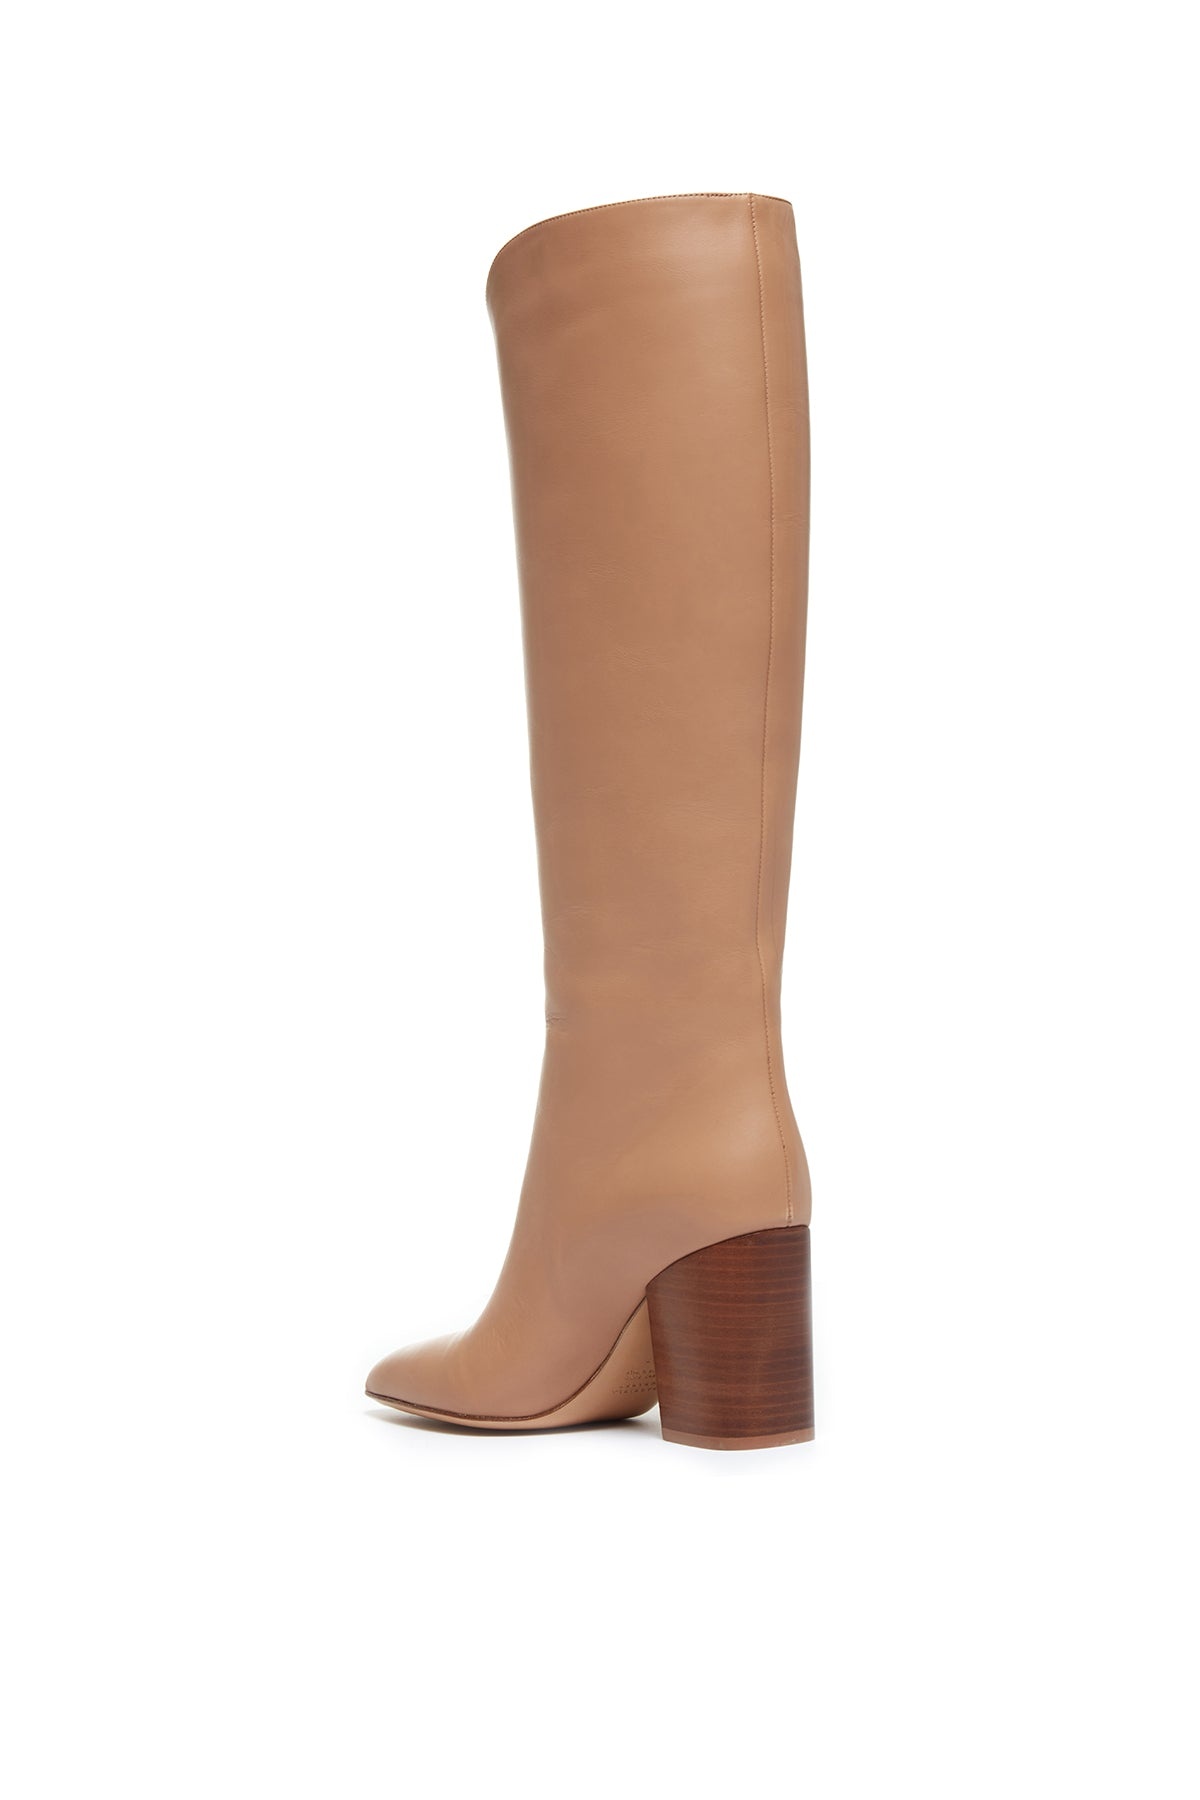 Cora Knee High Boot in Camel Leather - 3